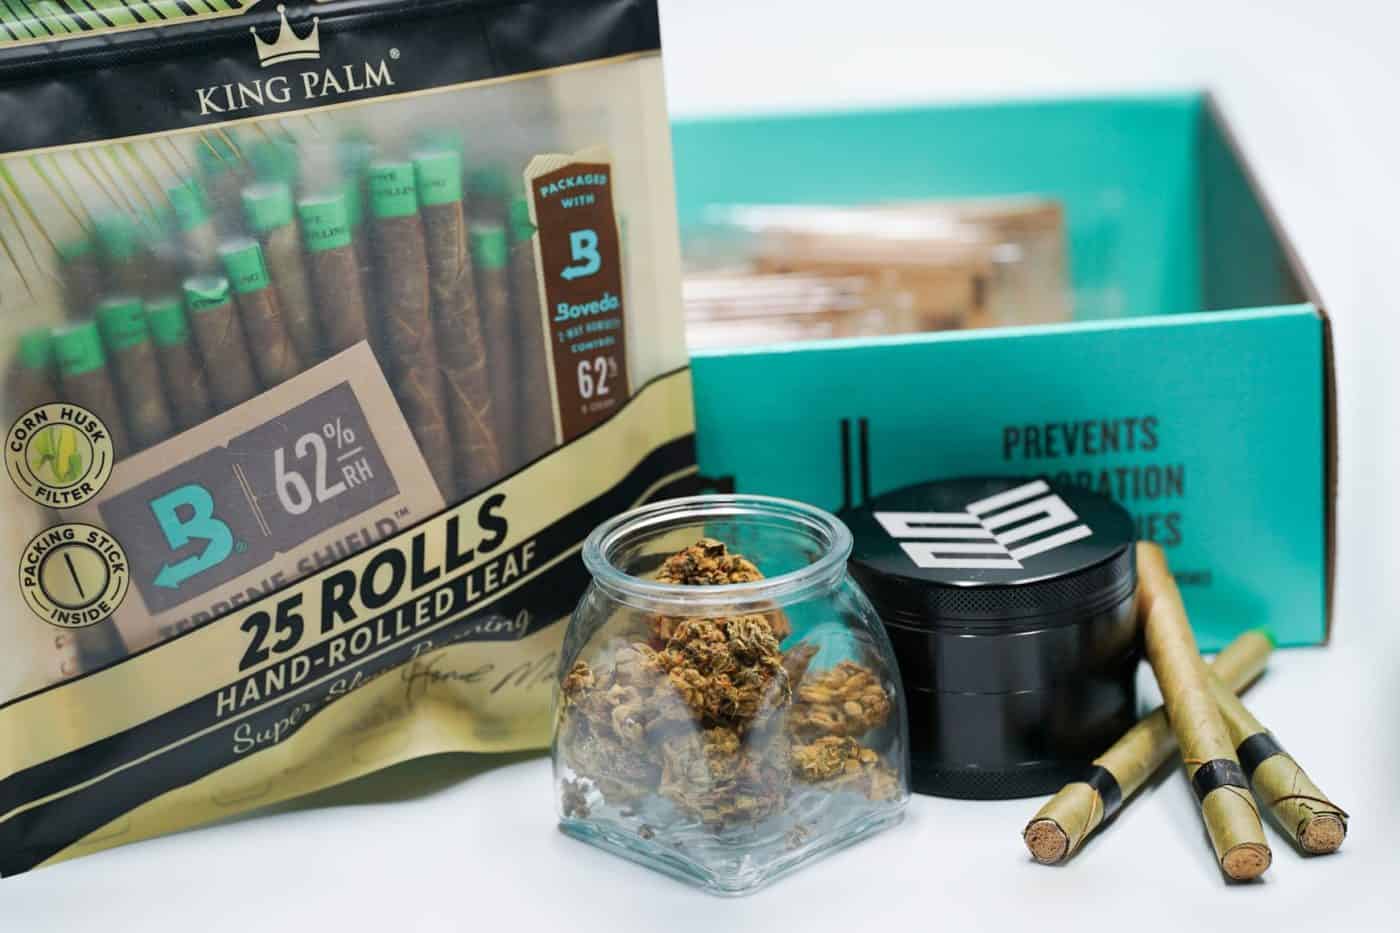 How to Make a Profit From Selling Weed: 10 Tips for Success